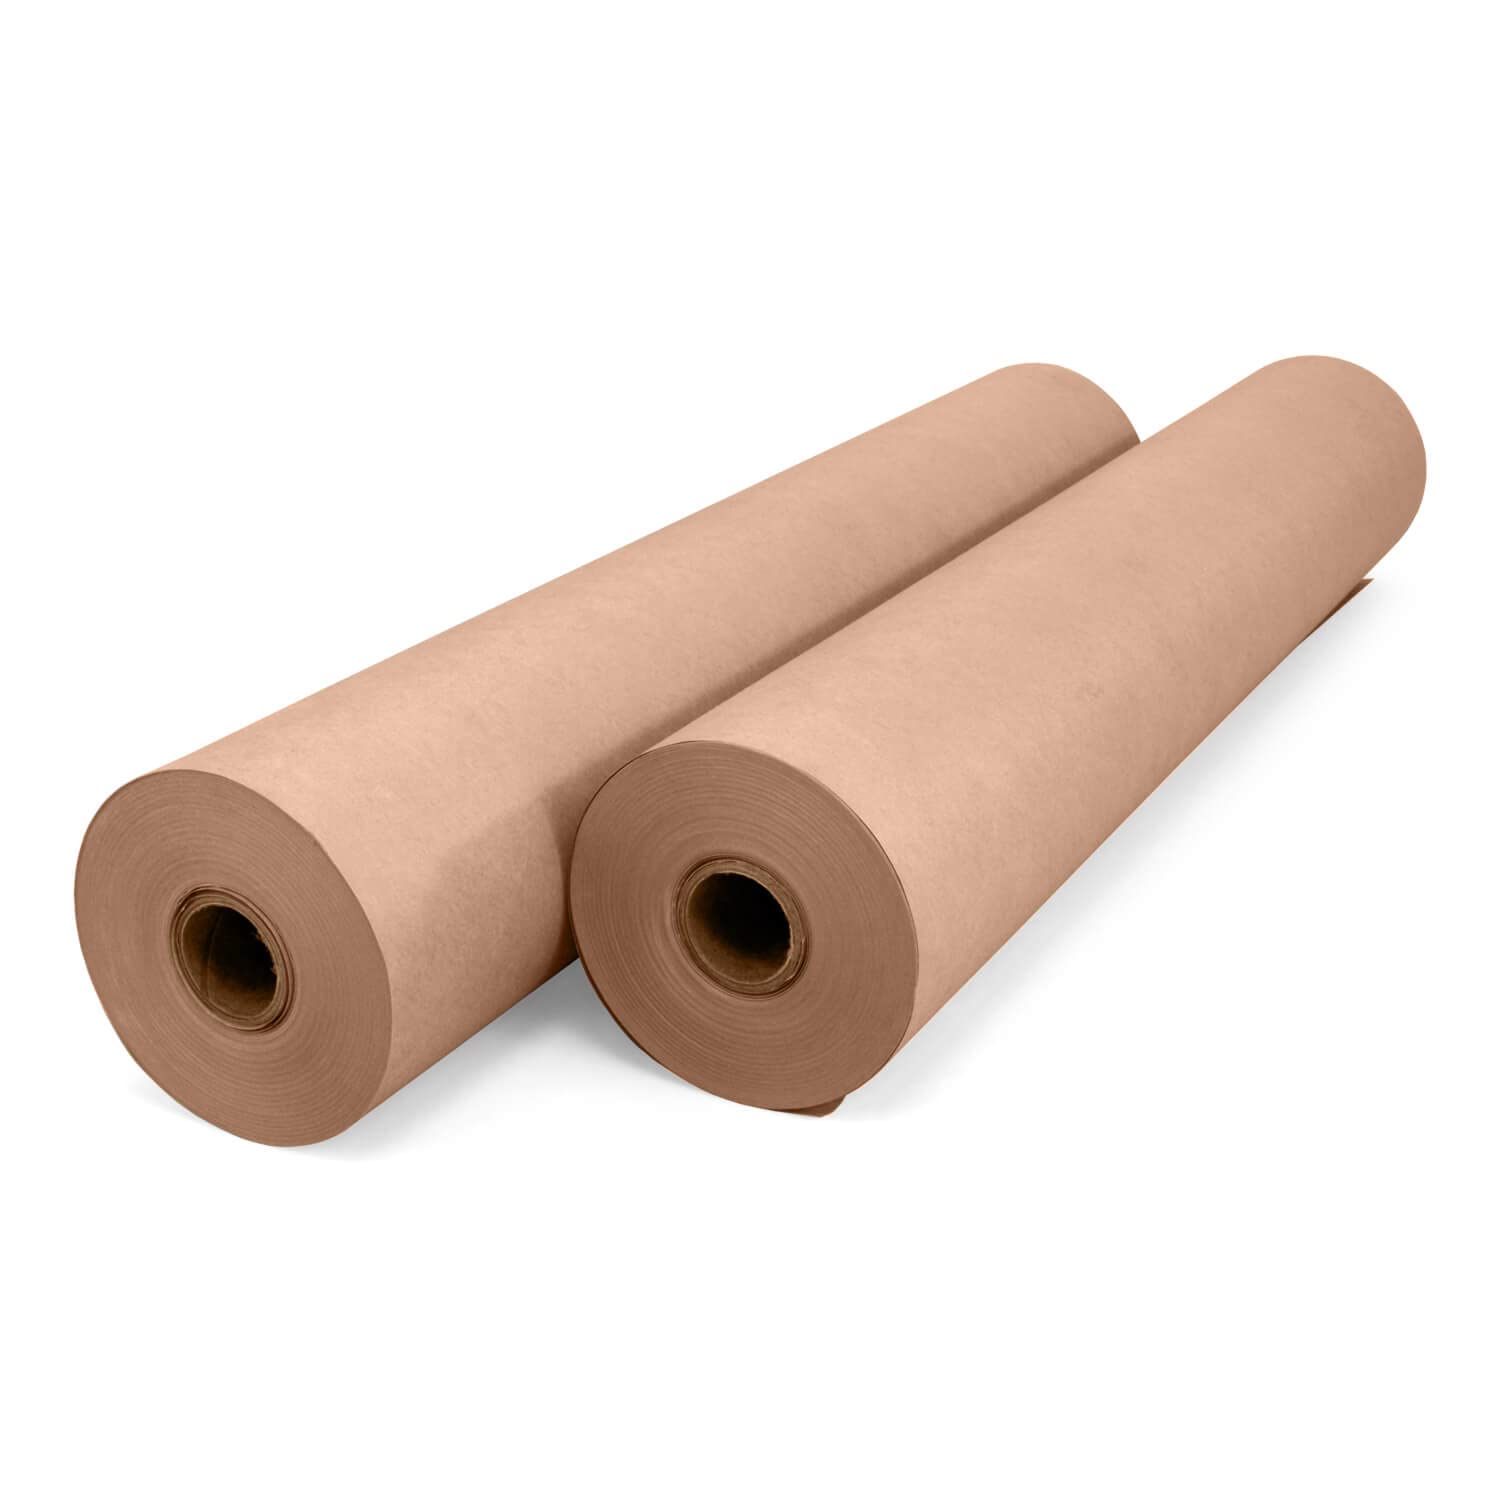 IDL Packaging 36 x 180 feet (2160 inches) Brown Kraft Paper Roll